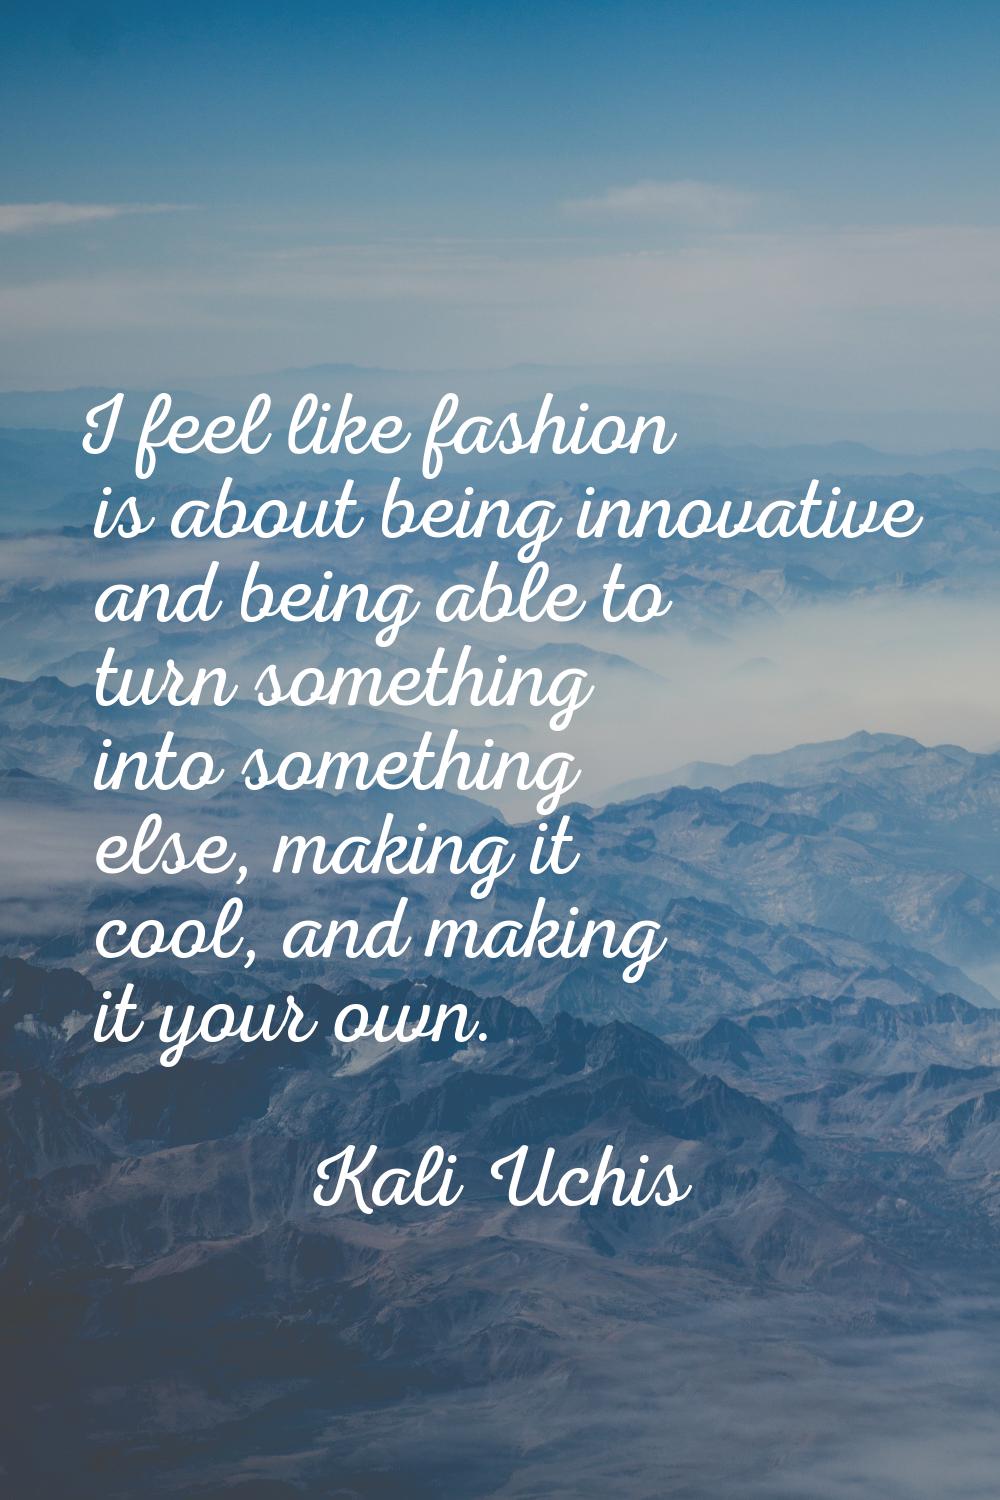 I feel like fashion is about being innovative and being able to turn something into something else,